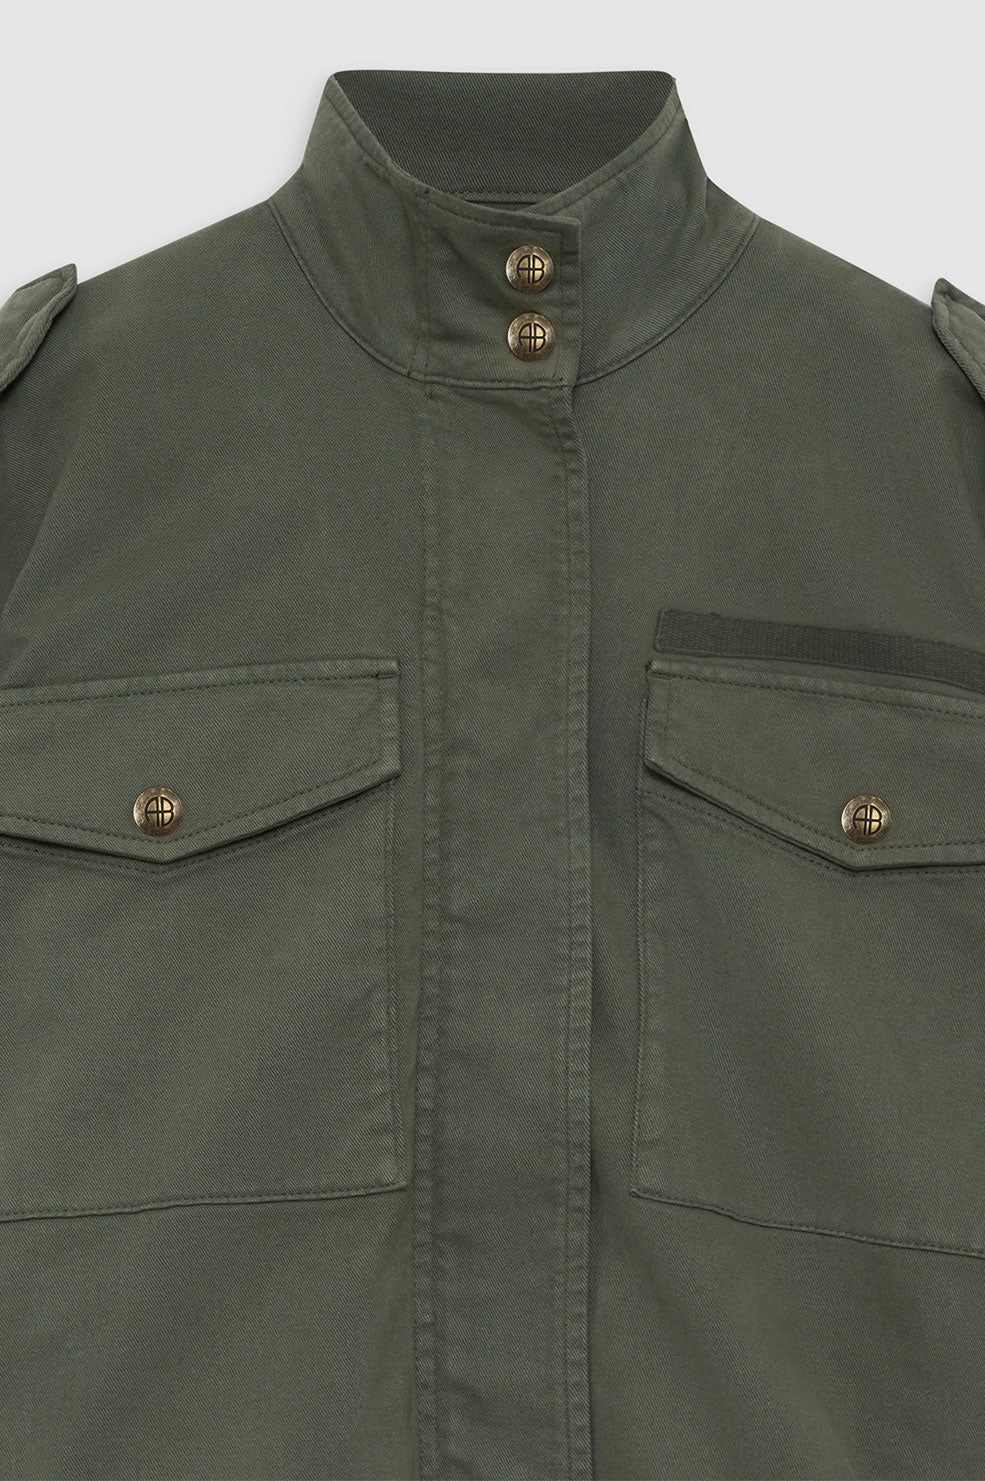 ANINE BING Audrey Jacket - Army Green - Detail View